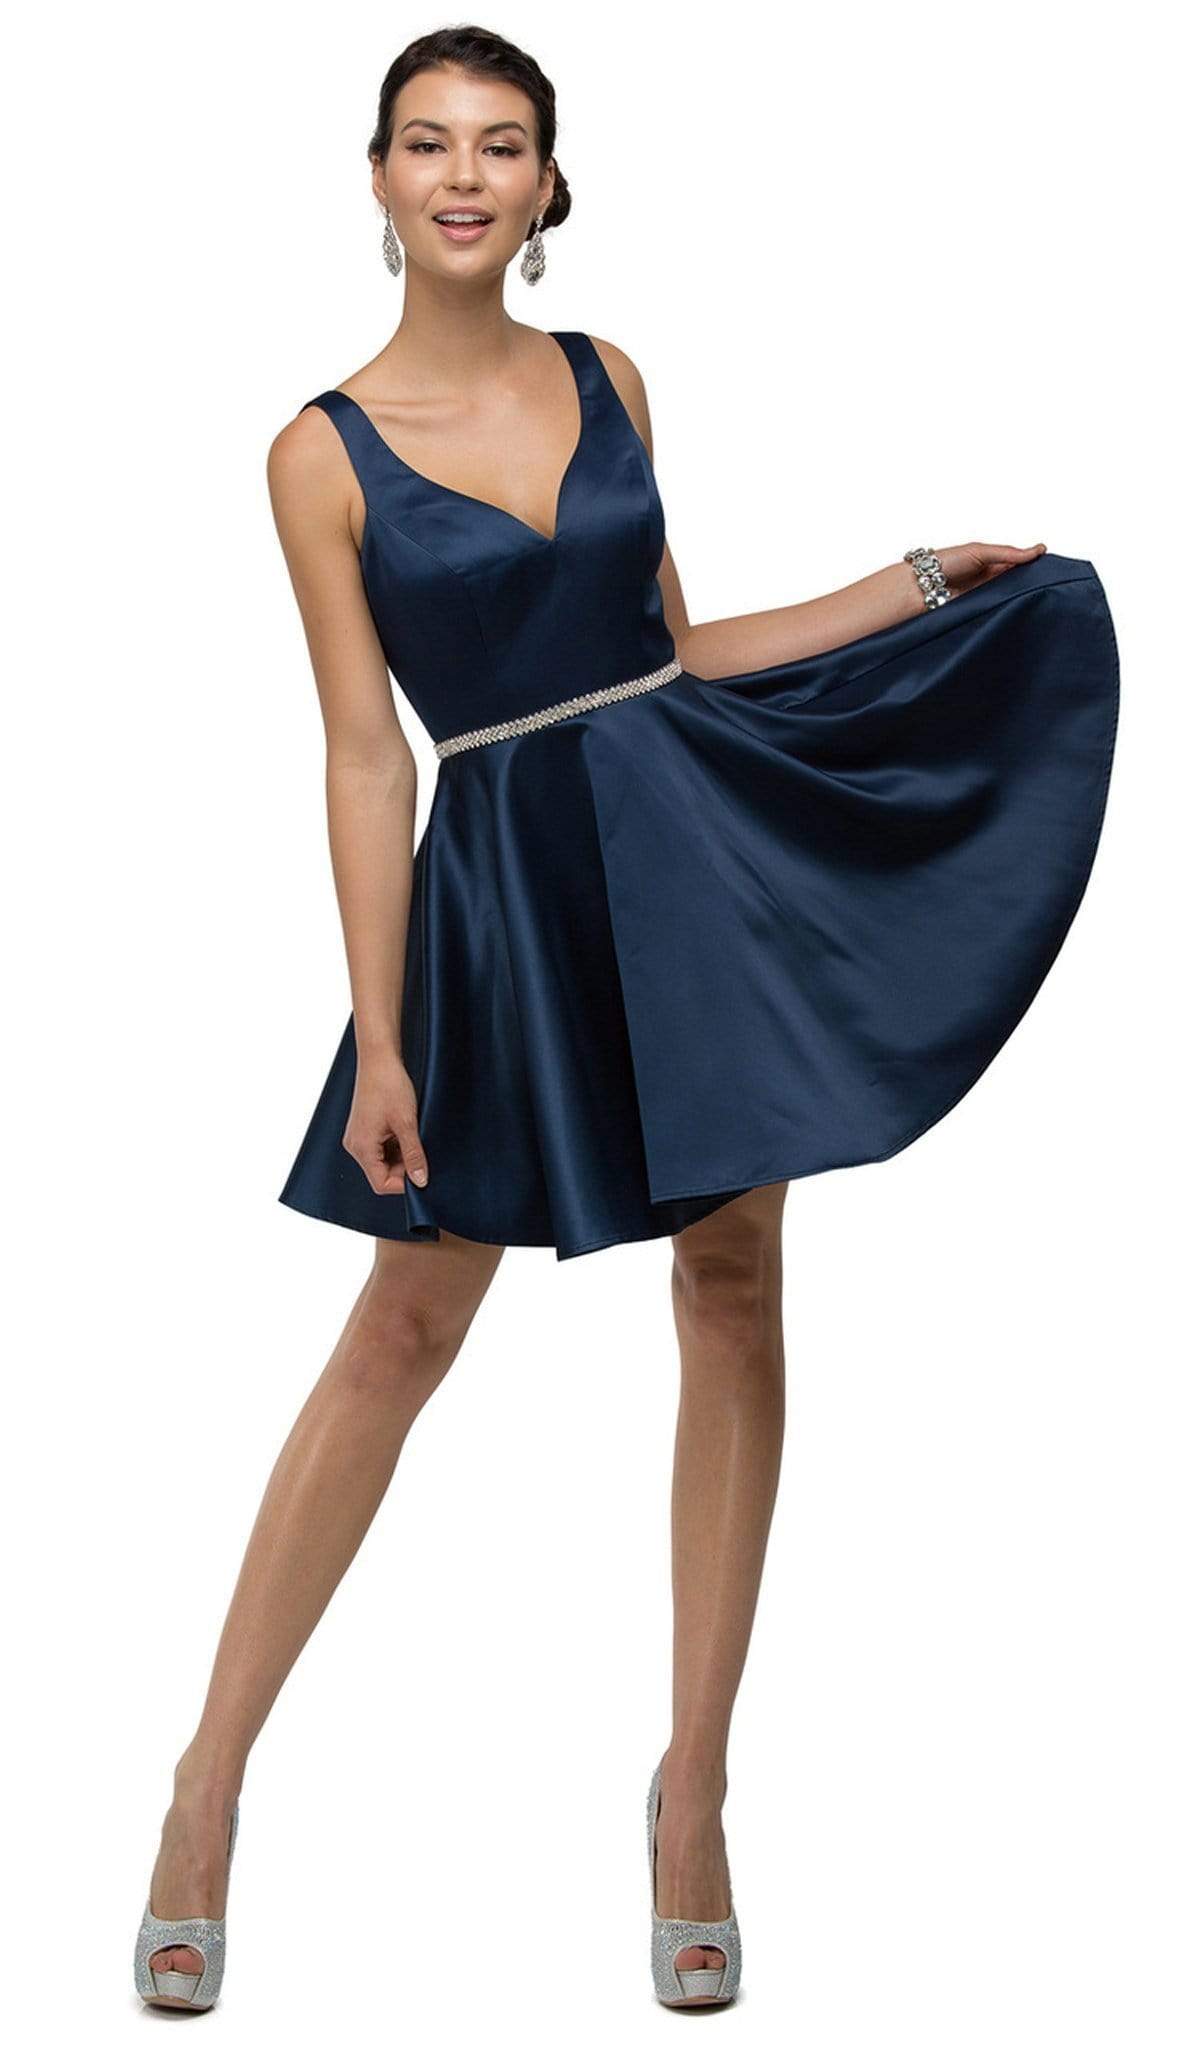 Image of Dancing Queen - 9504 Sleeveless Sweetheart Satin Bejeweled Cocktail Dress